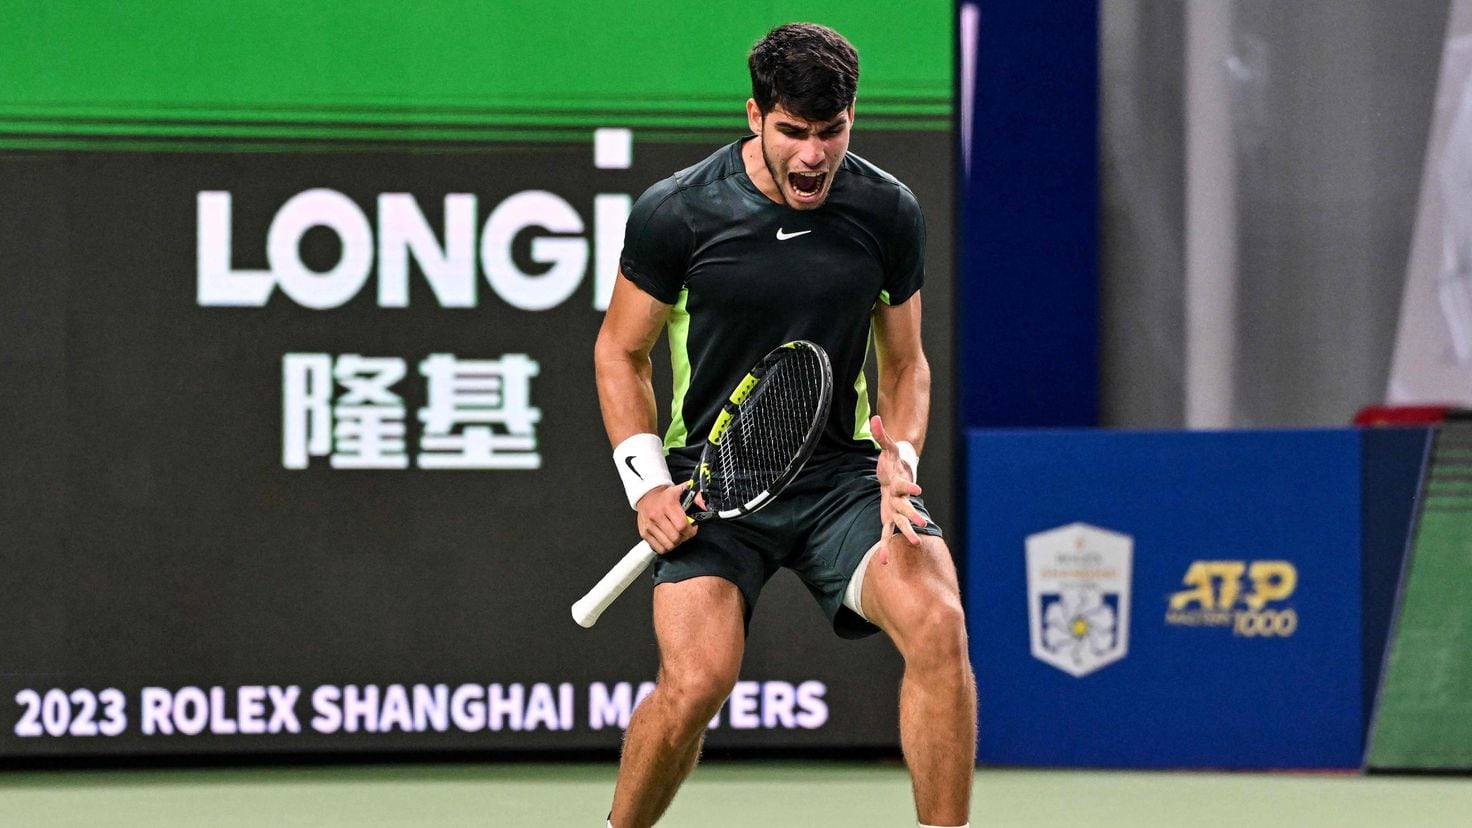 2023 Rolex Shanghai Masters Schedule of Play & How to Watch on TV